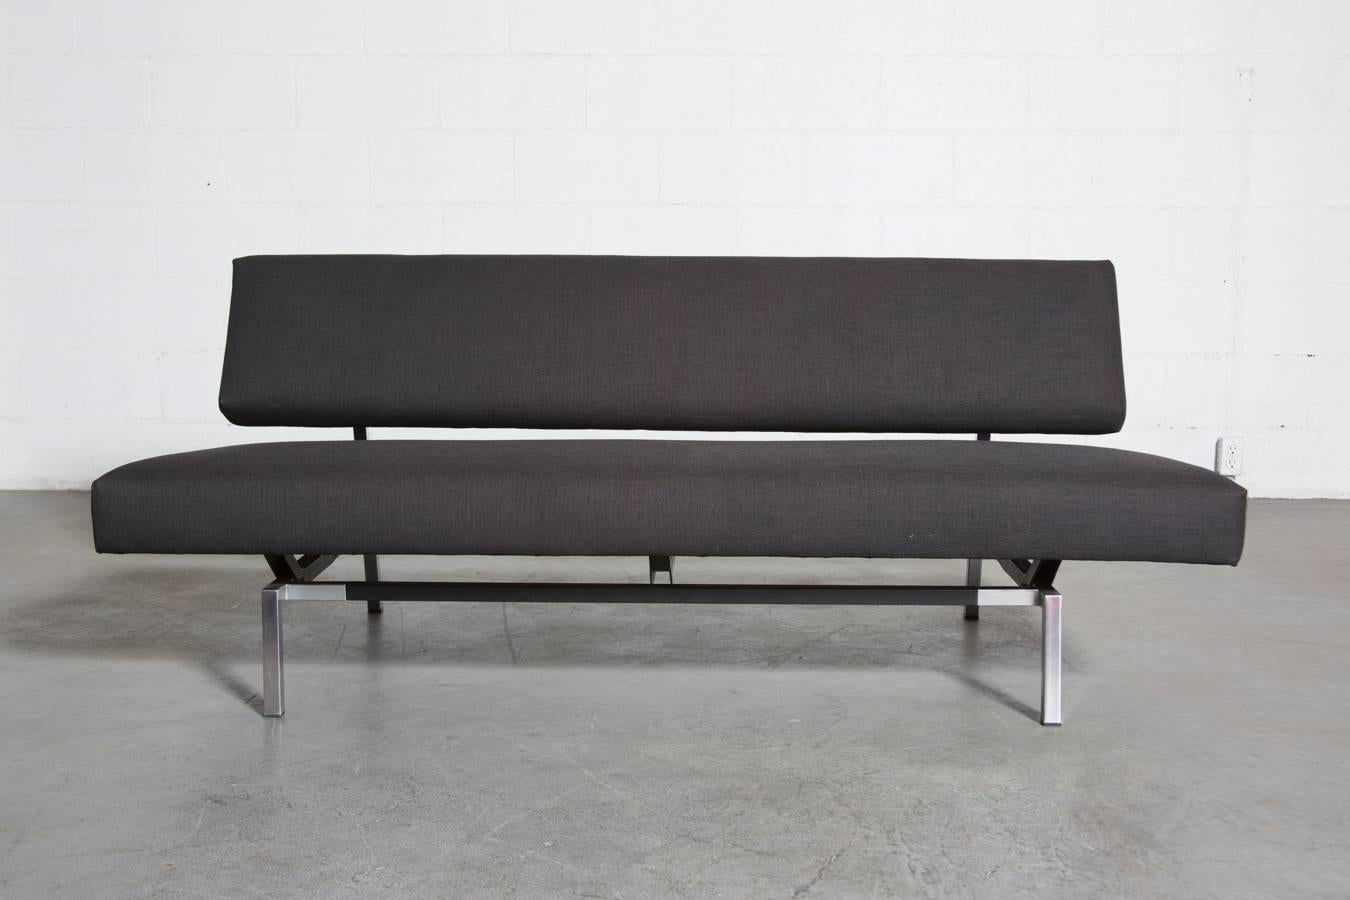 Martin Visser Style sofa with chrome and black enameled metal frame. Newly upholstered in charcoal black fabric. Frame is in original condition with some wear consistent with age and use. Super sleek and streamlined design.